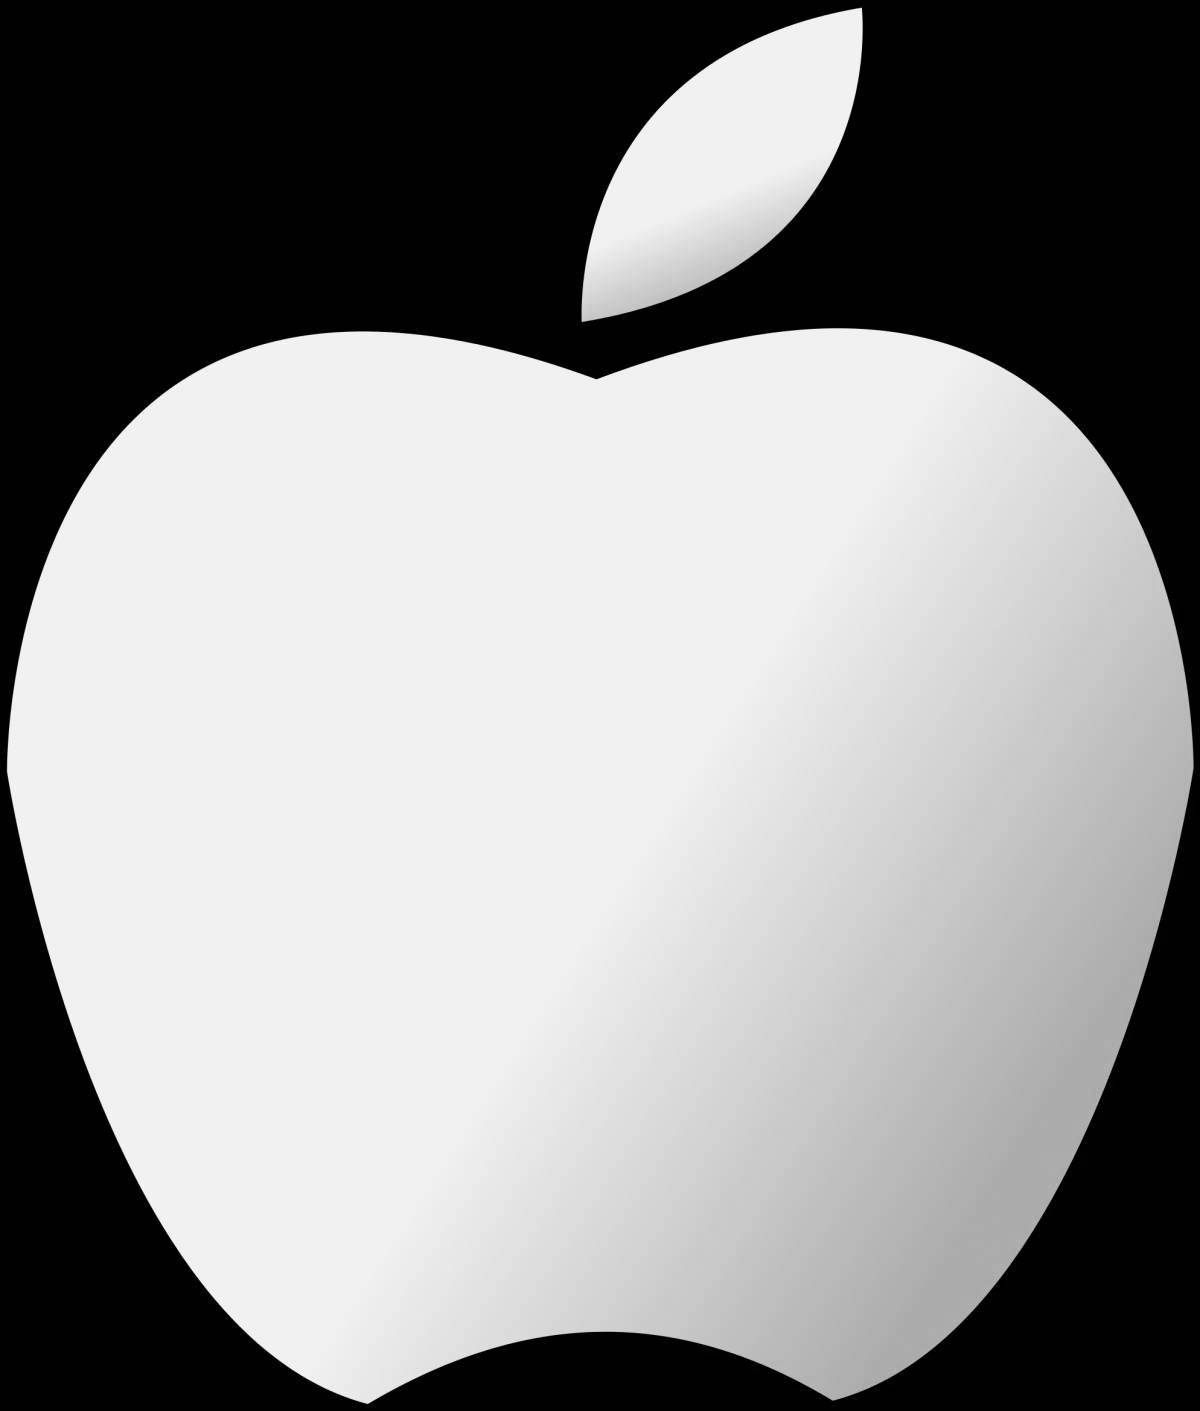 Adorable apple icon coloring page